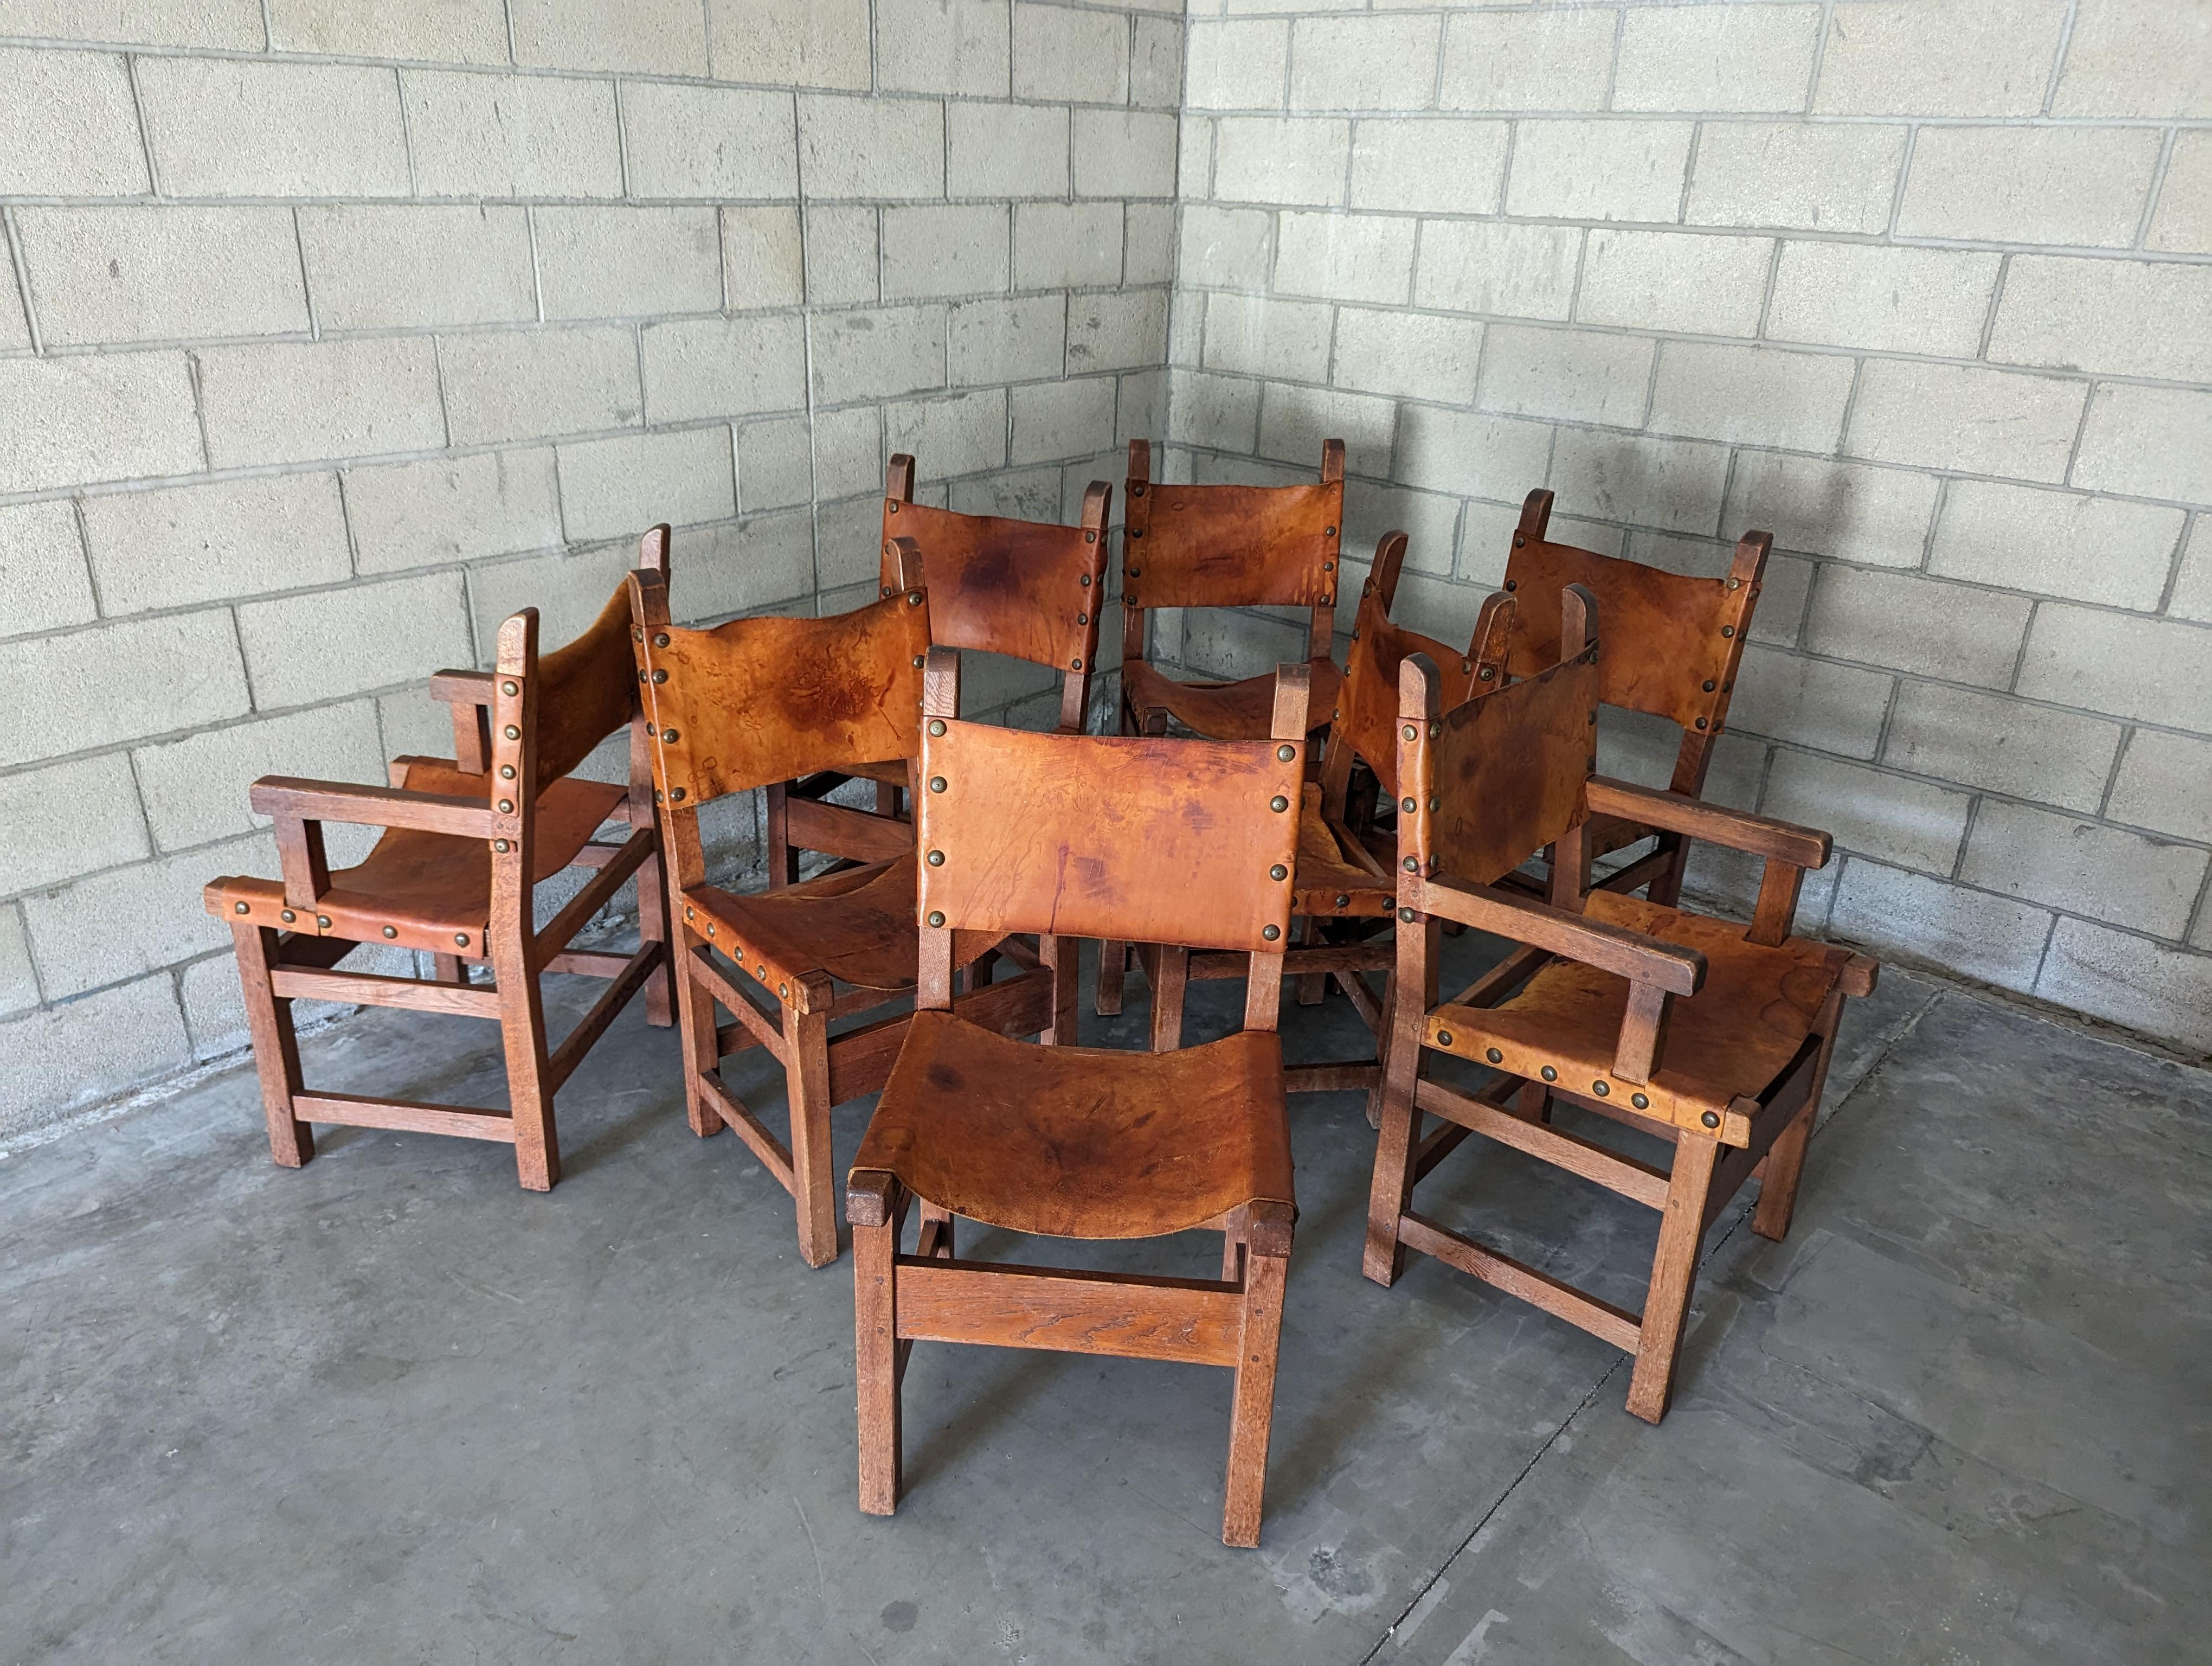 Spanish Colonial Set of 8 Spanish Hand-Crafted Oak & Cognac Studded Leather Dining Chairs